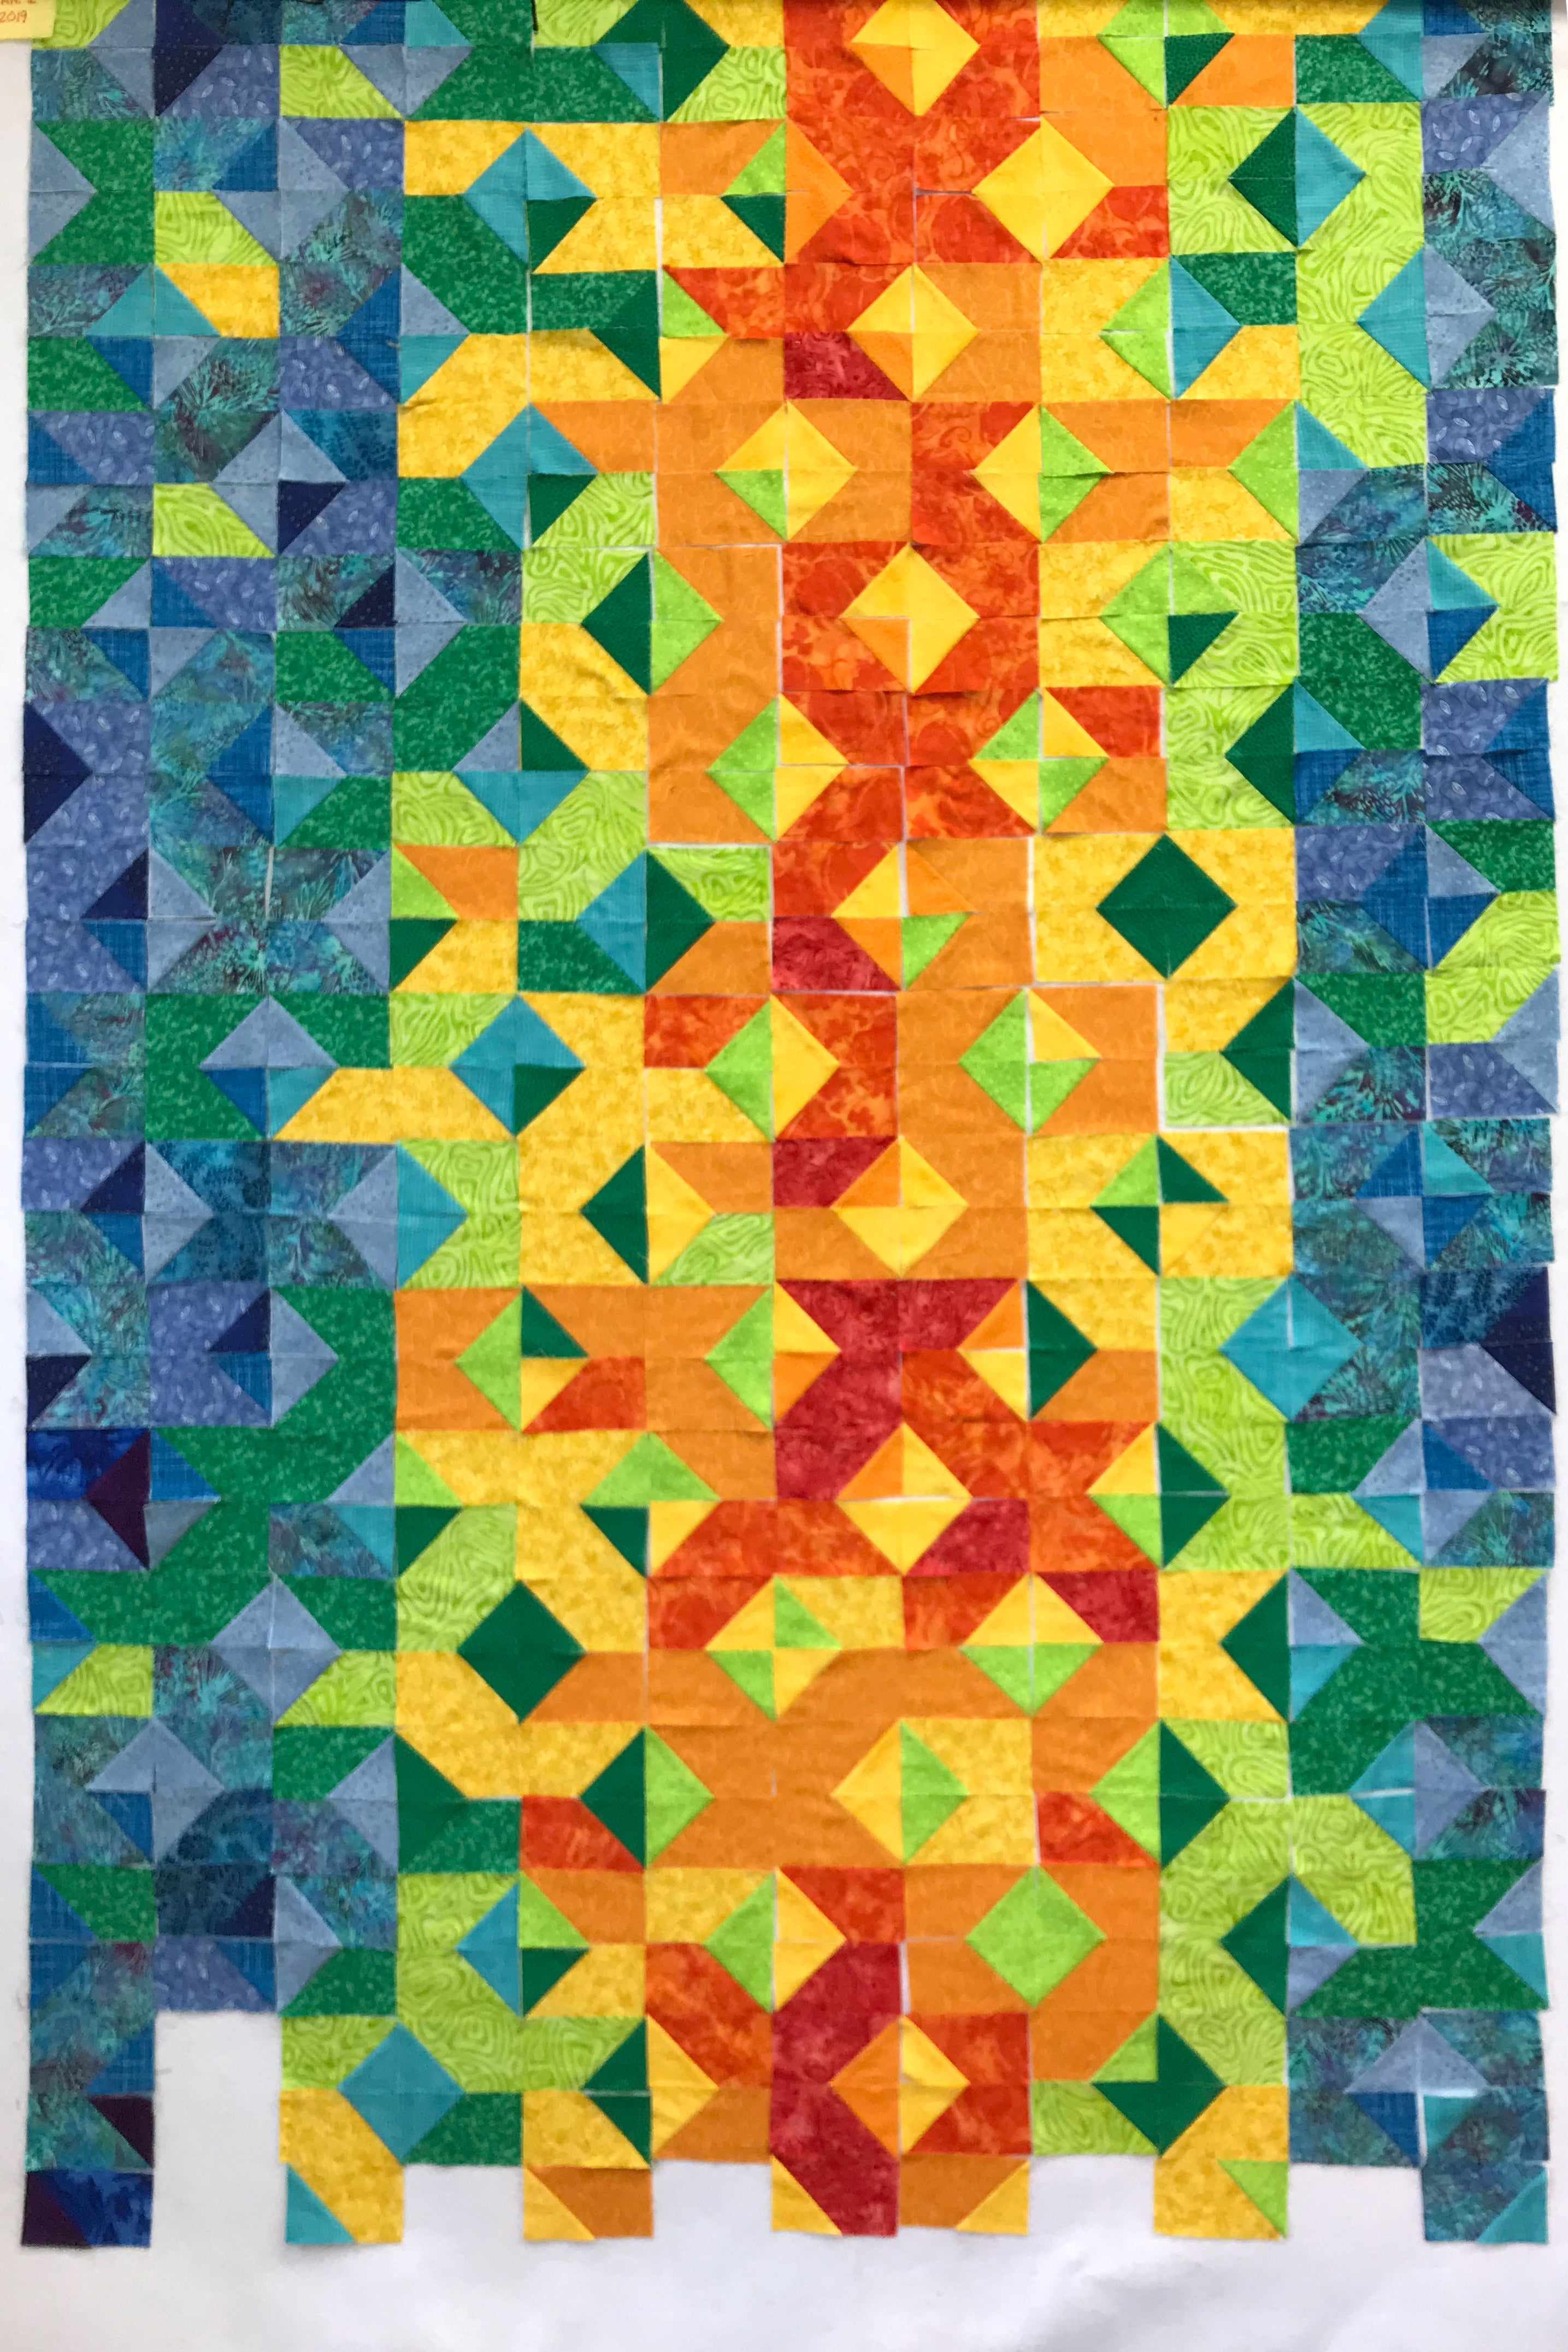 A quilt with reds, oranges, and yellows to represent hot temperatures and blues and greens to represent cool temperatures.